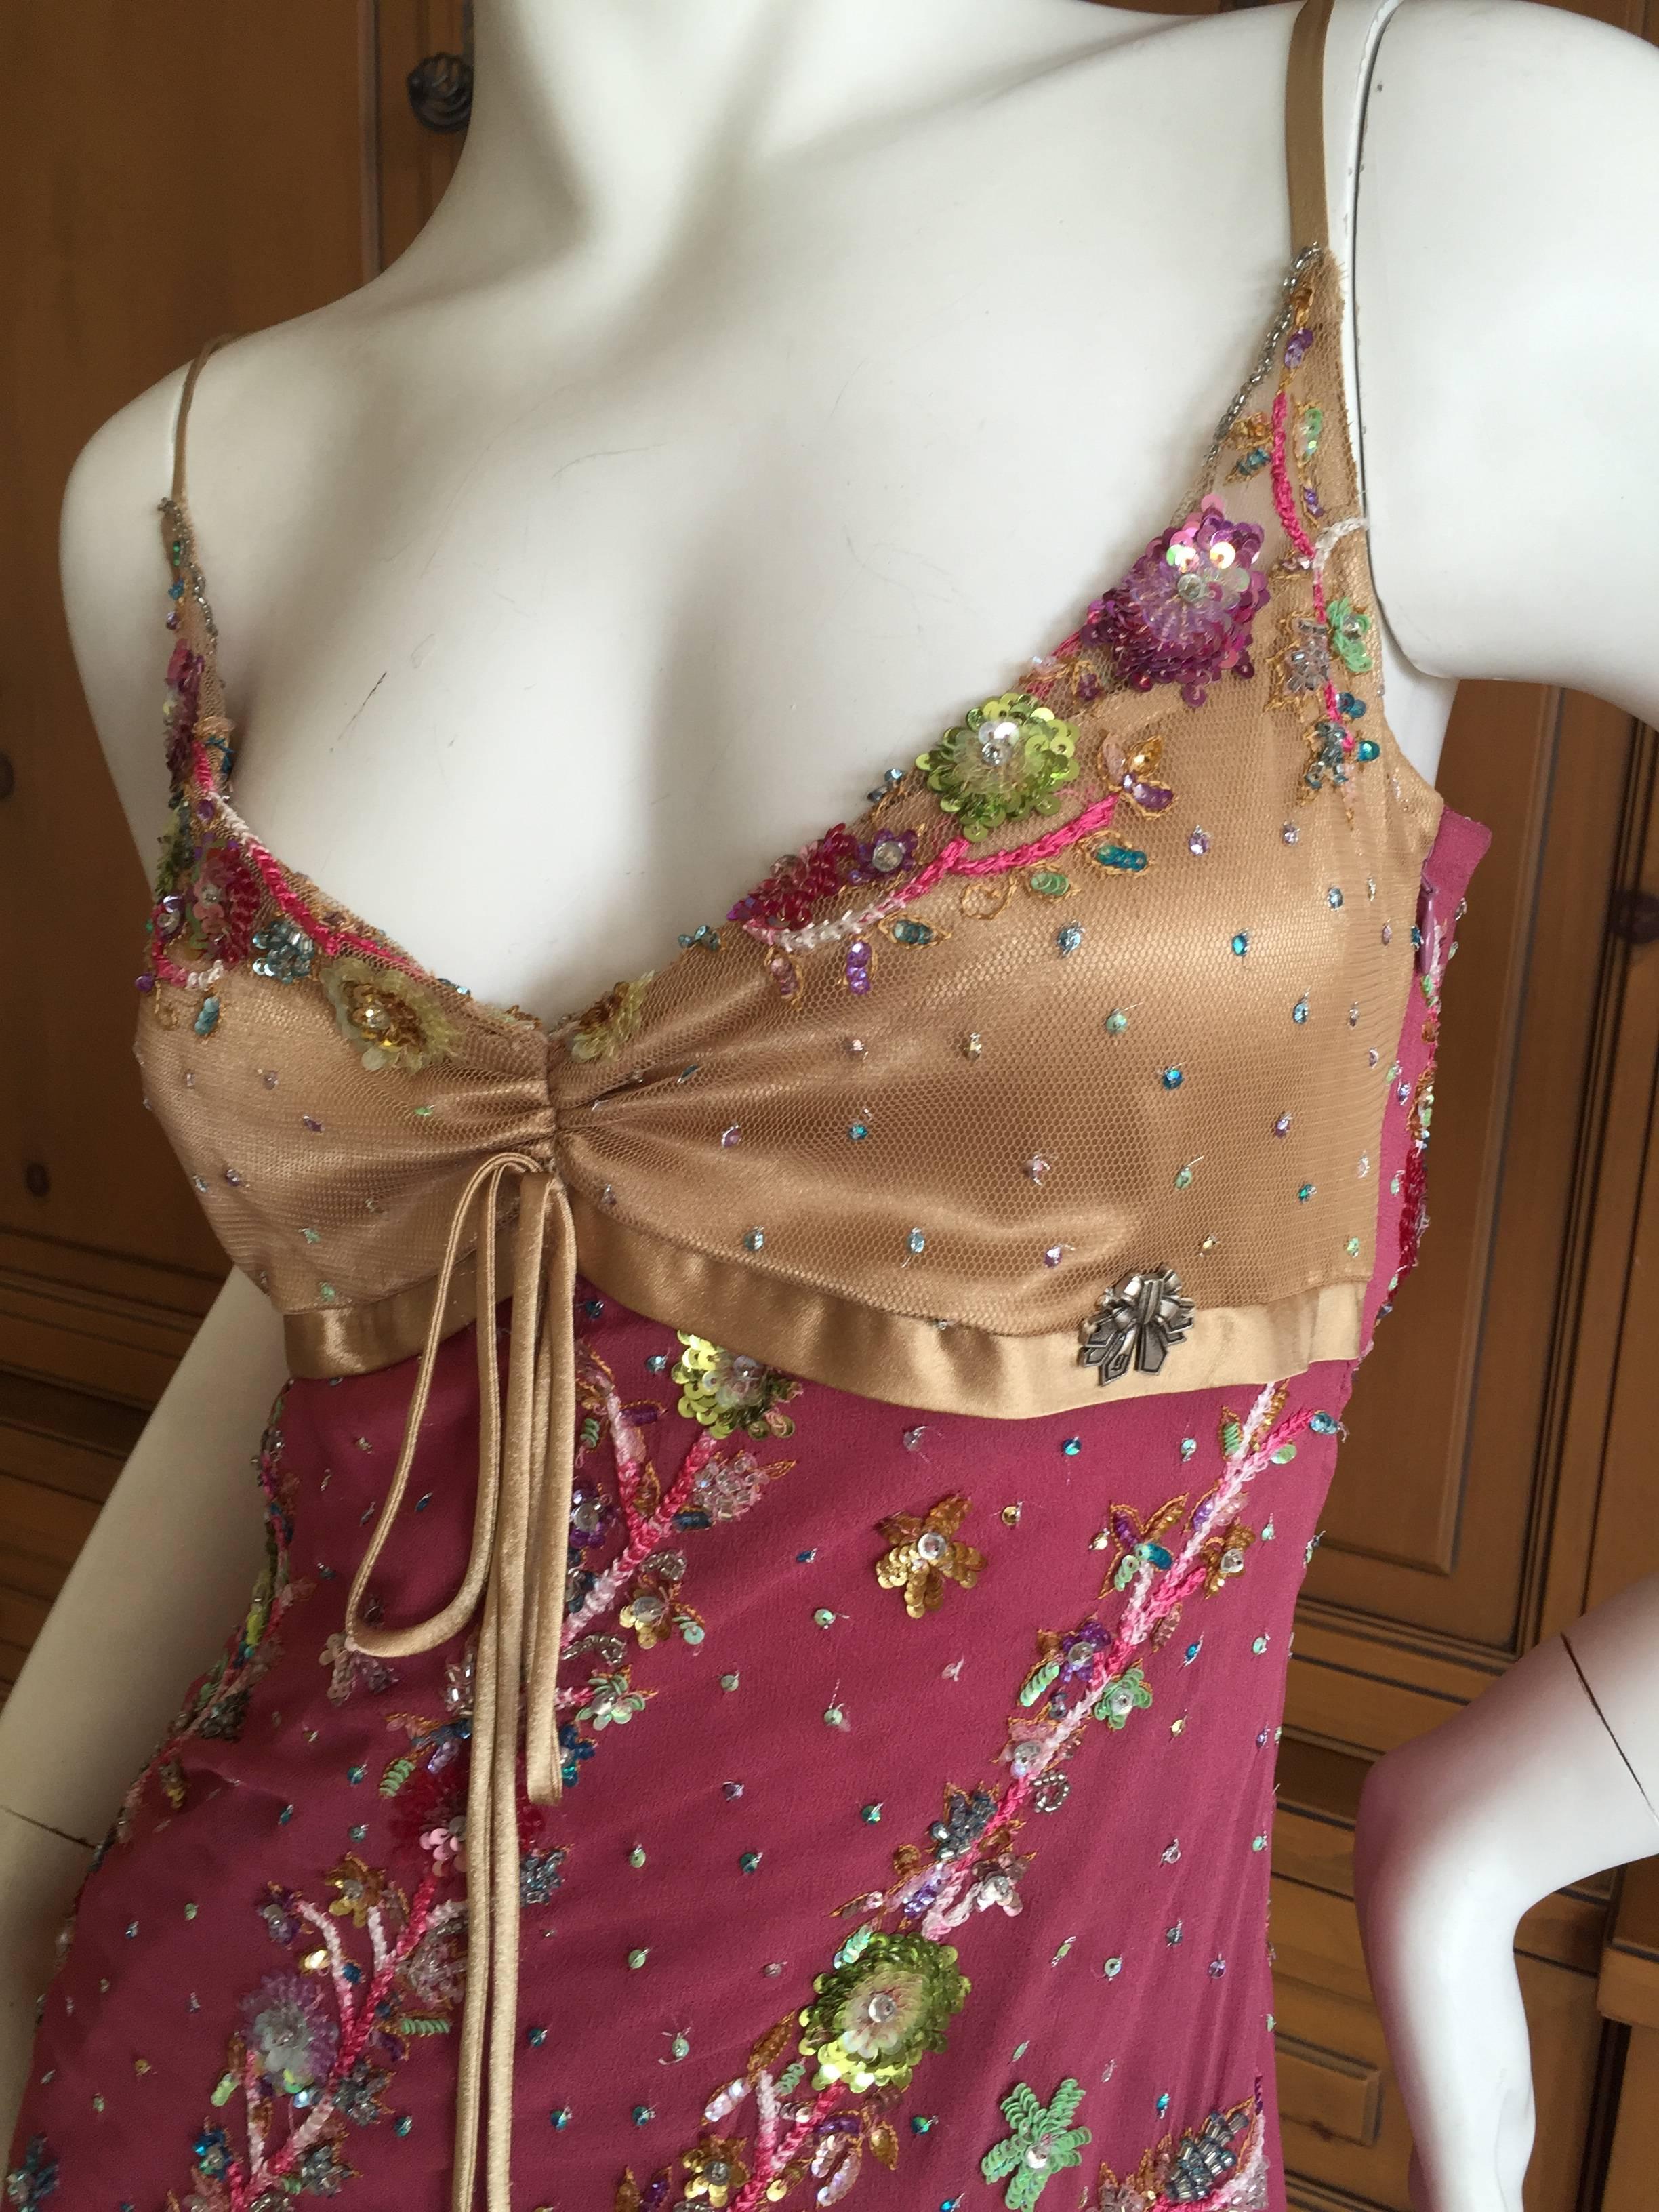 John Galliano Mini Dress with Floral Sequin Details New 2